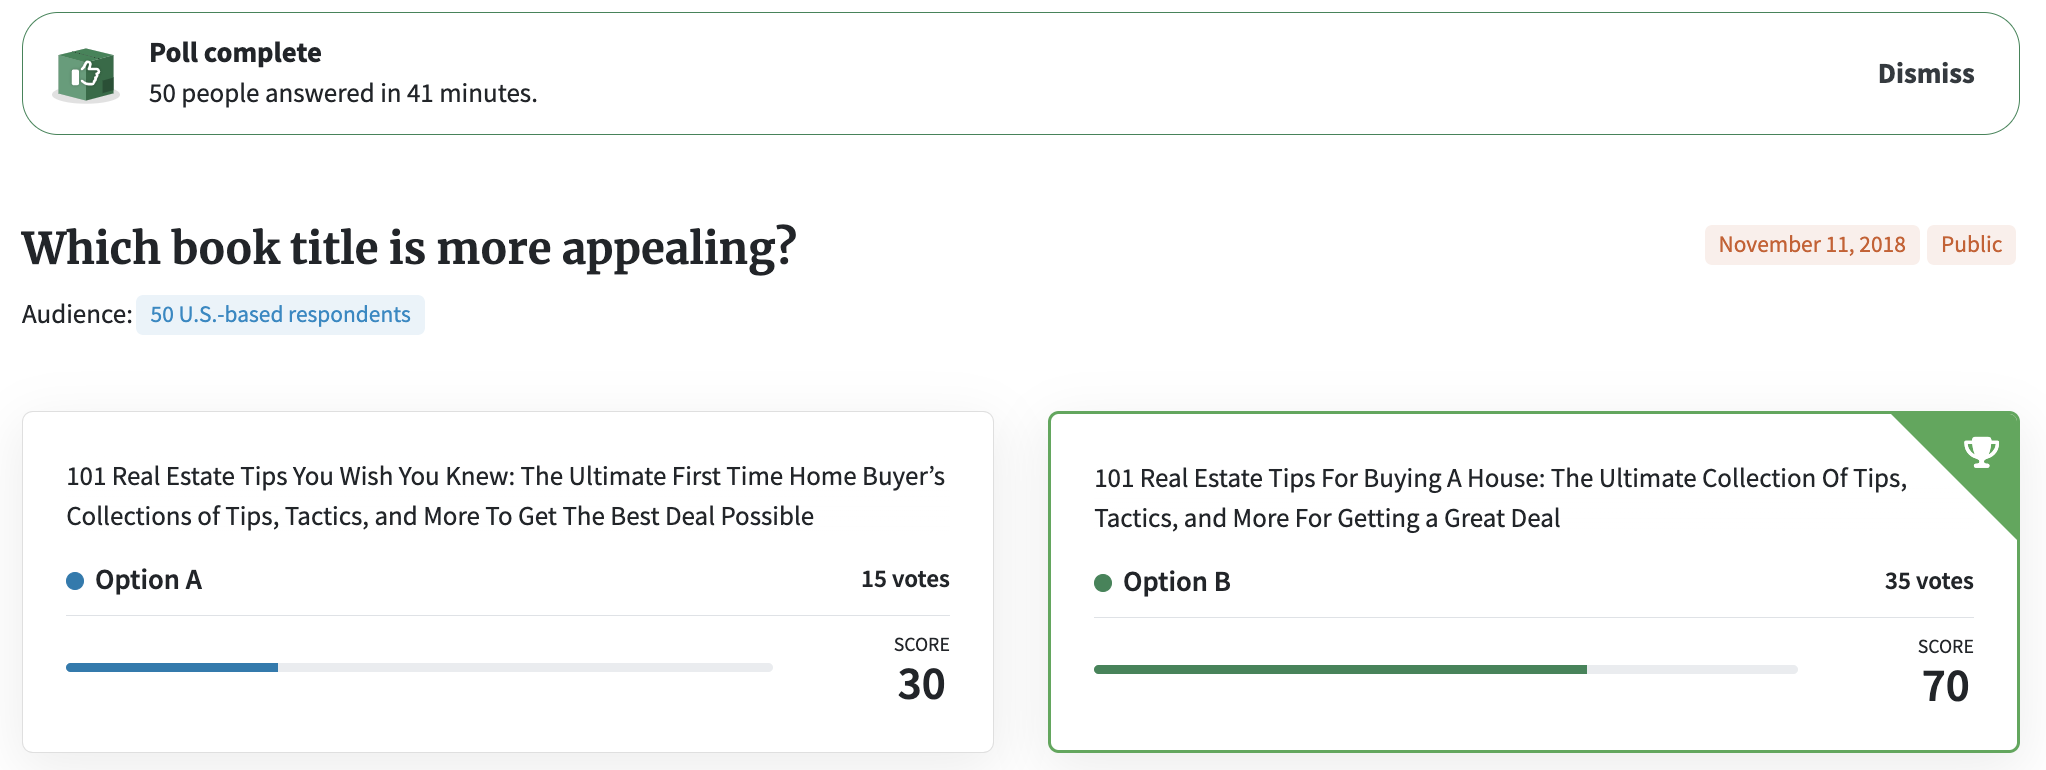 Double-barreled questions: Screenshot of PickFu poll testing real estate book title and subtitle.